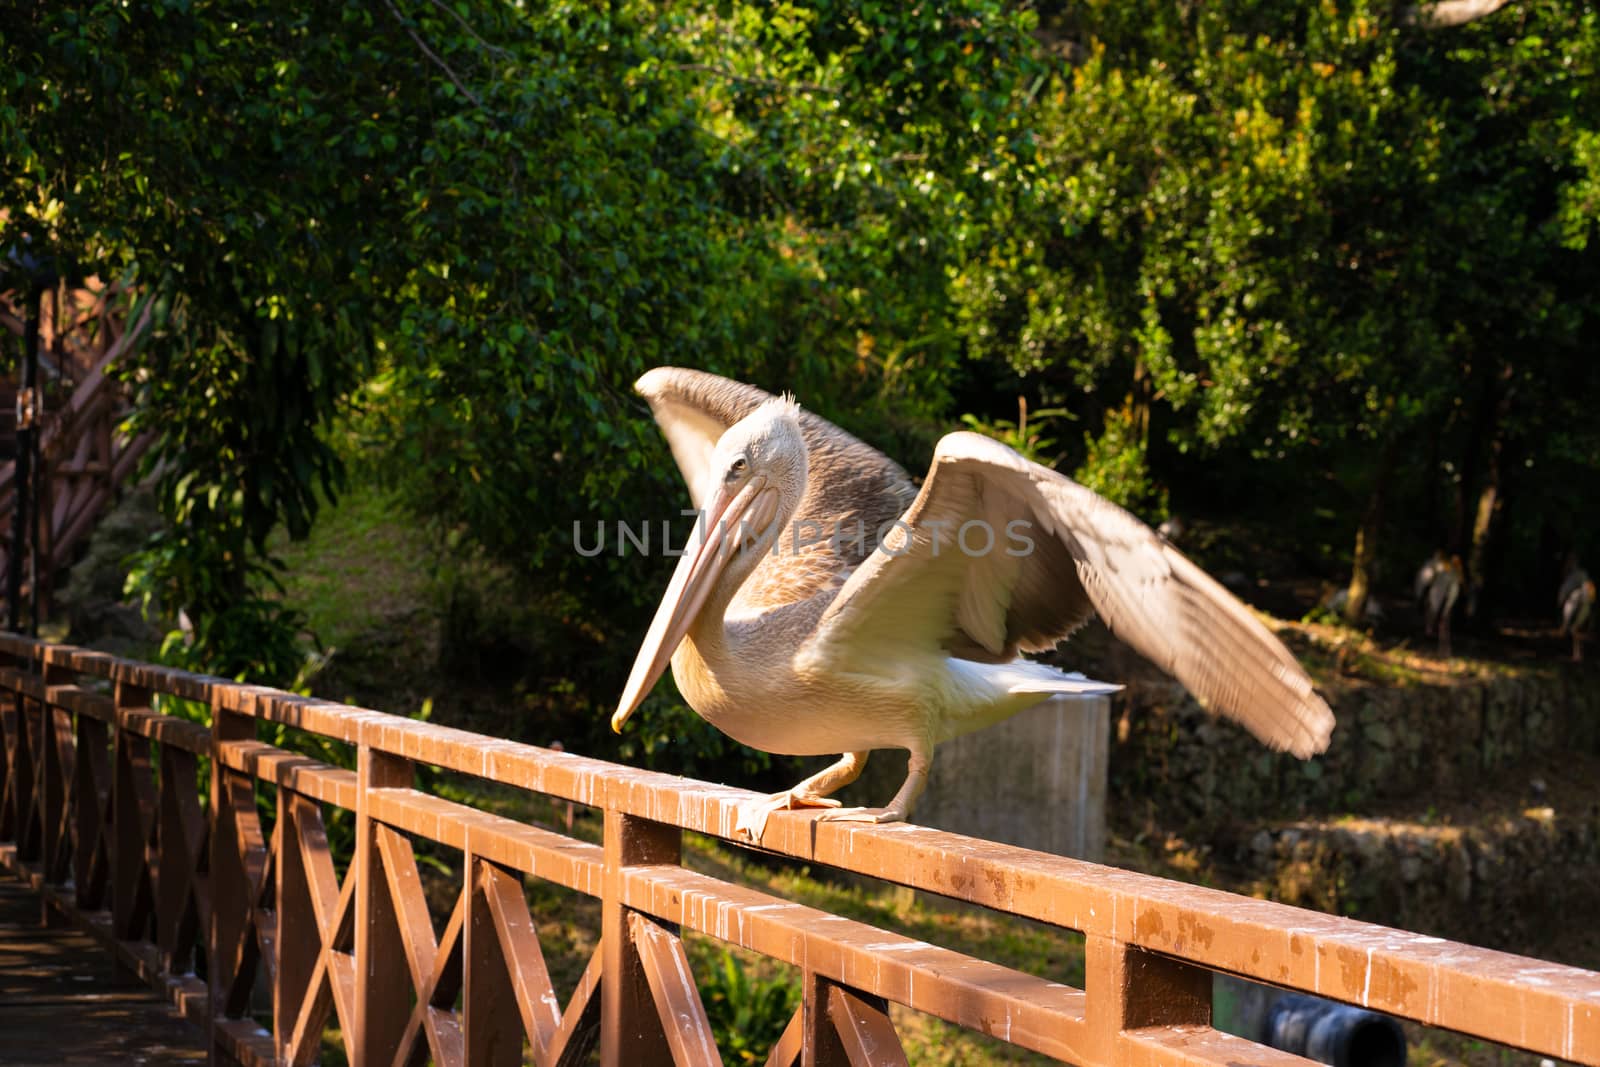 The white pelican that lives in the bird park sits on the railing of the bridge.